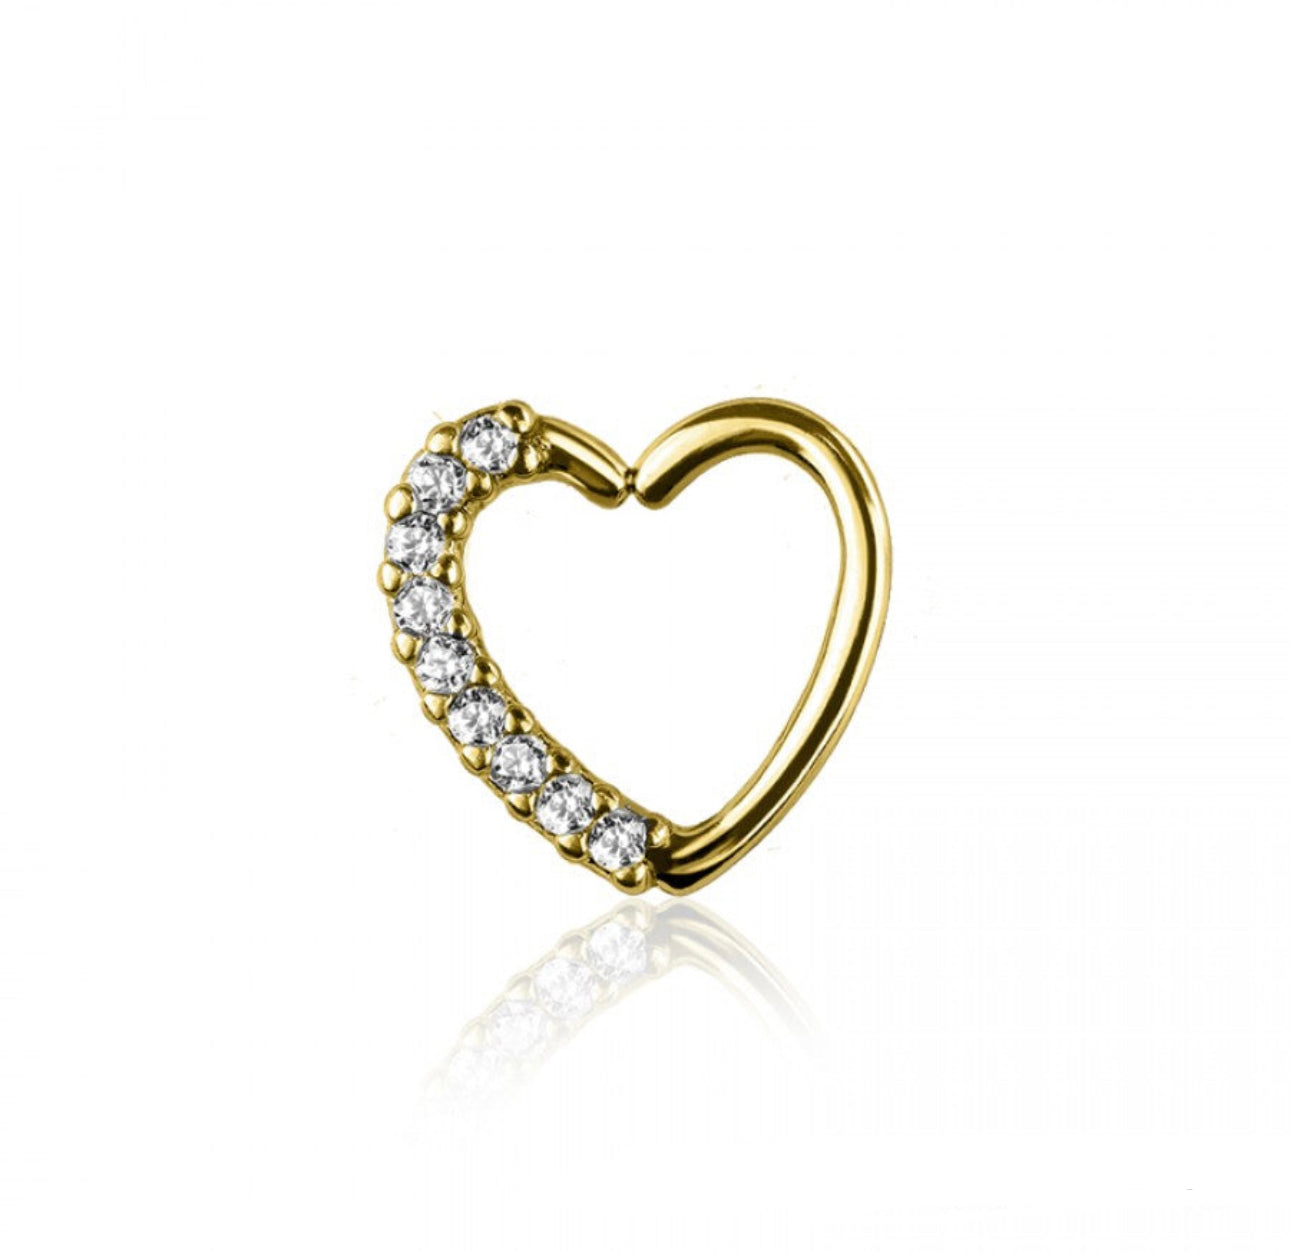 Heart Bend Ring - O6